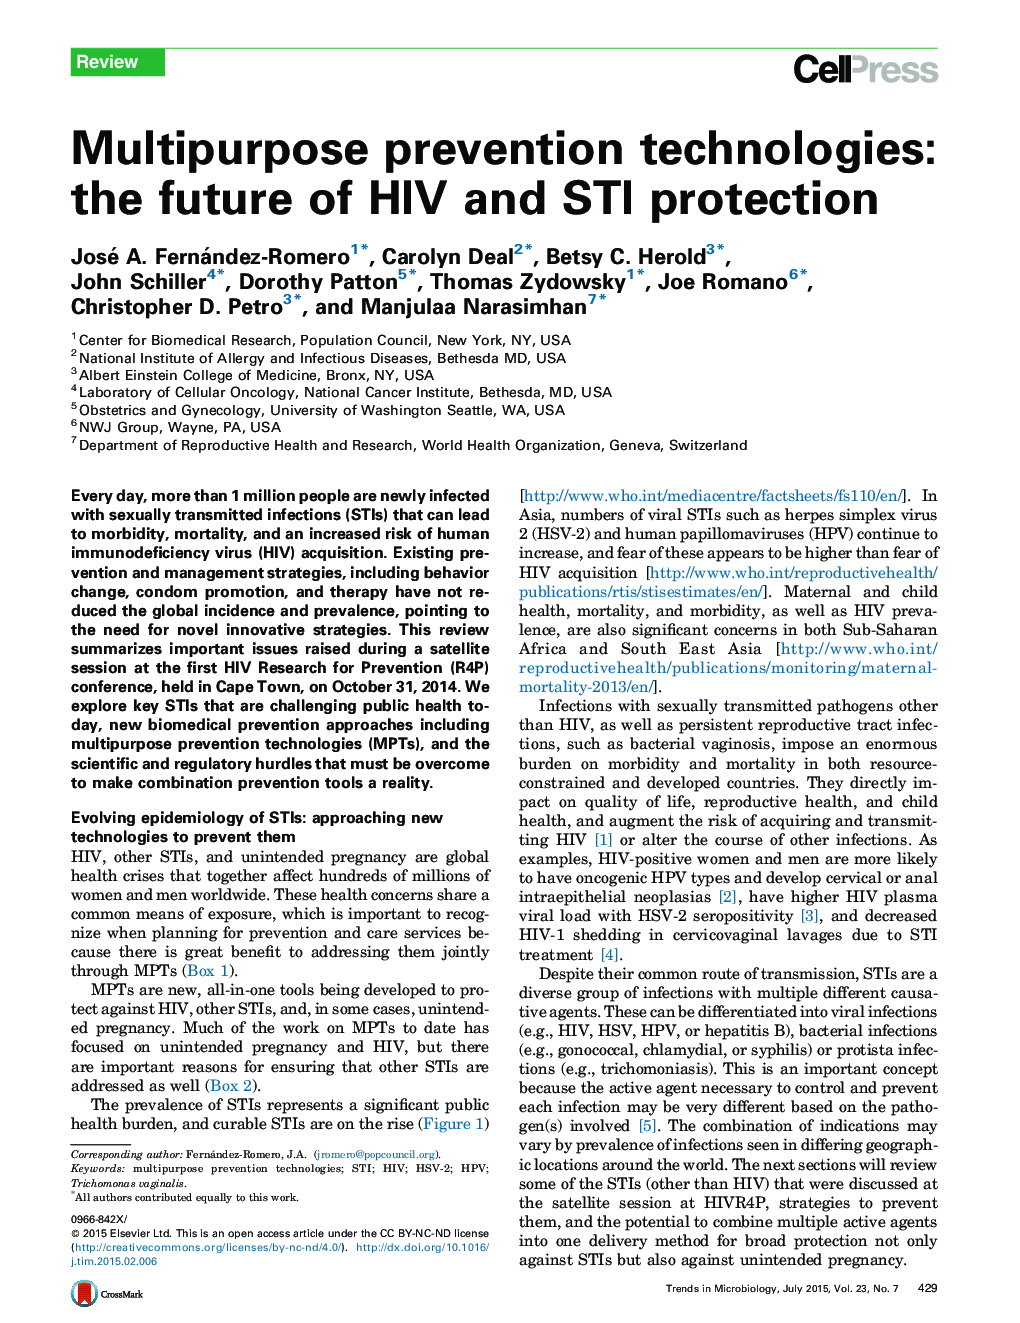 Multipurpose prevention technologies: the future of HIV and STI protection